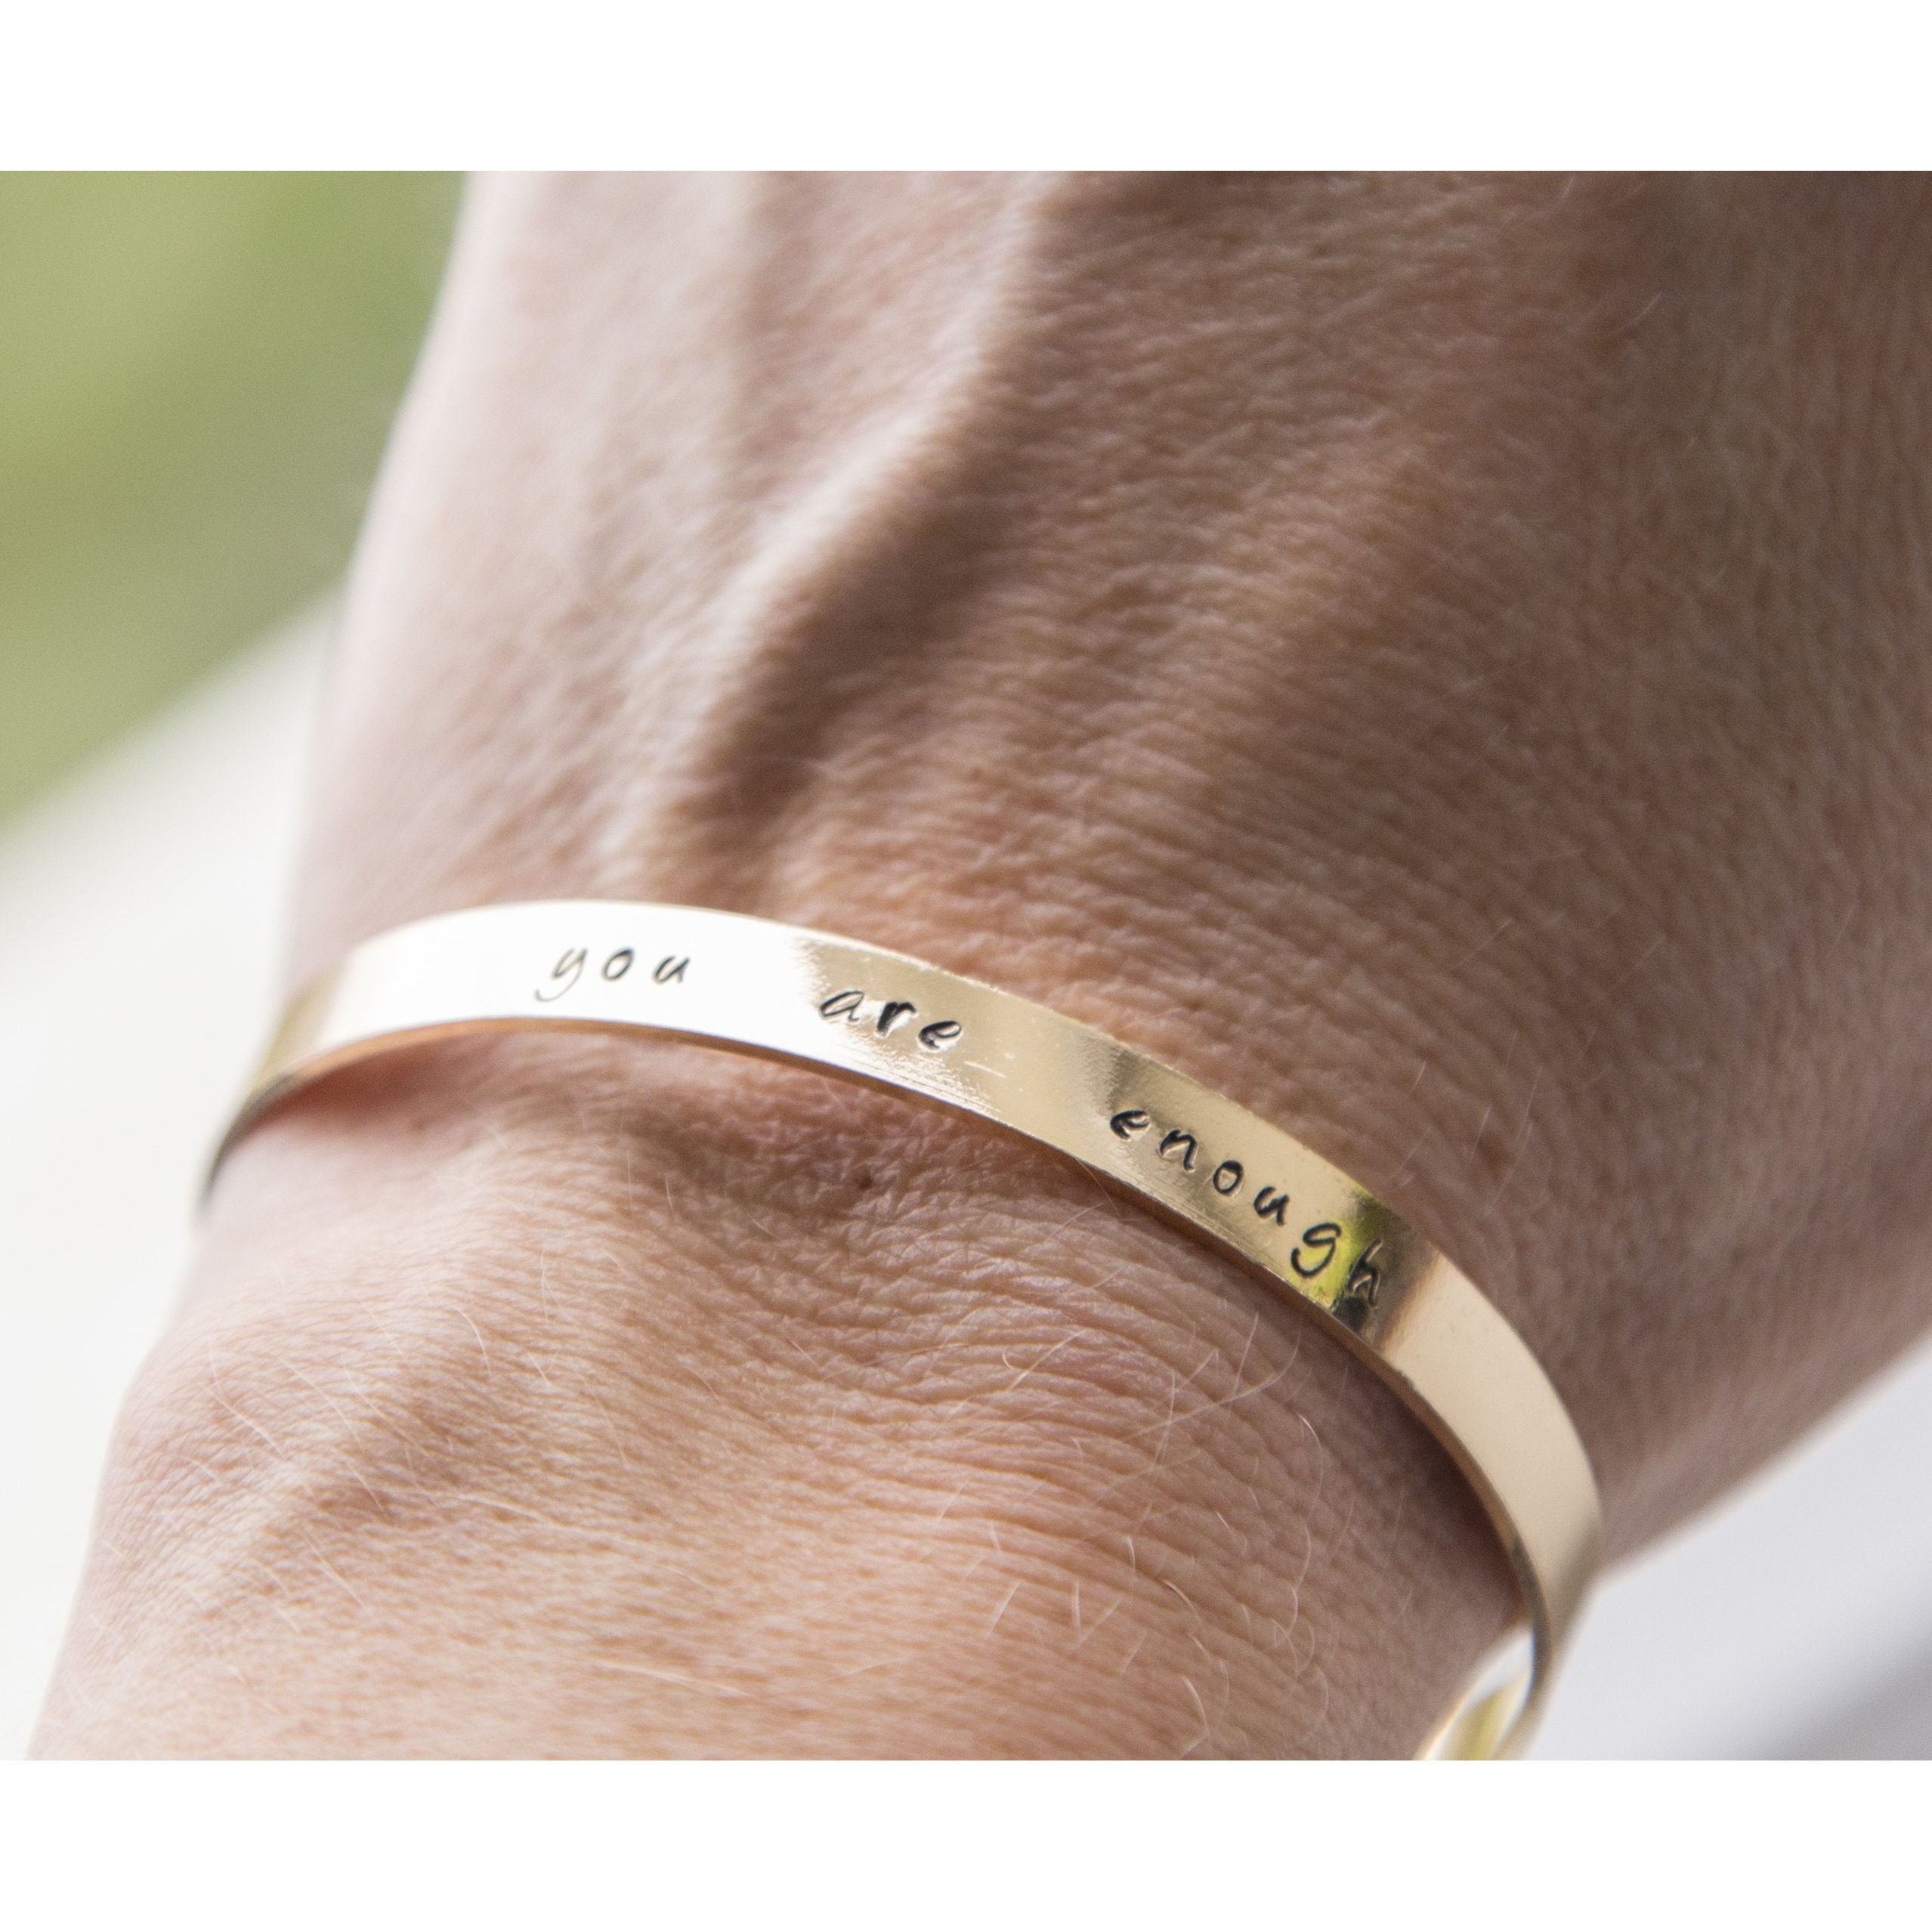 Personalized stamped cuff bracelet, hand stamped message quote